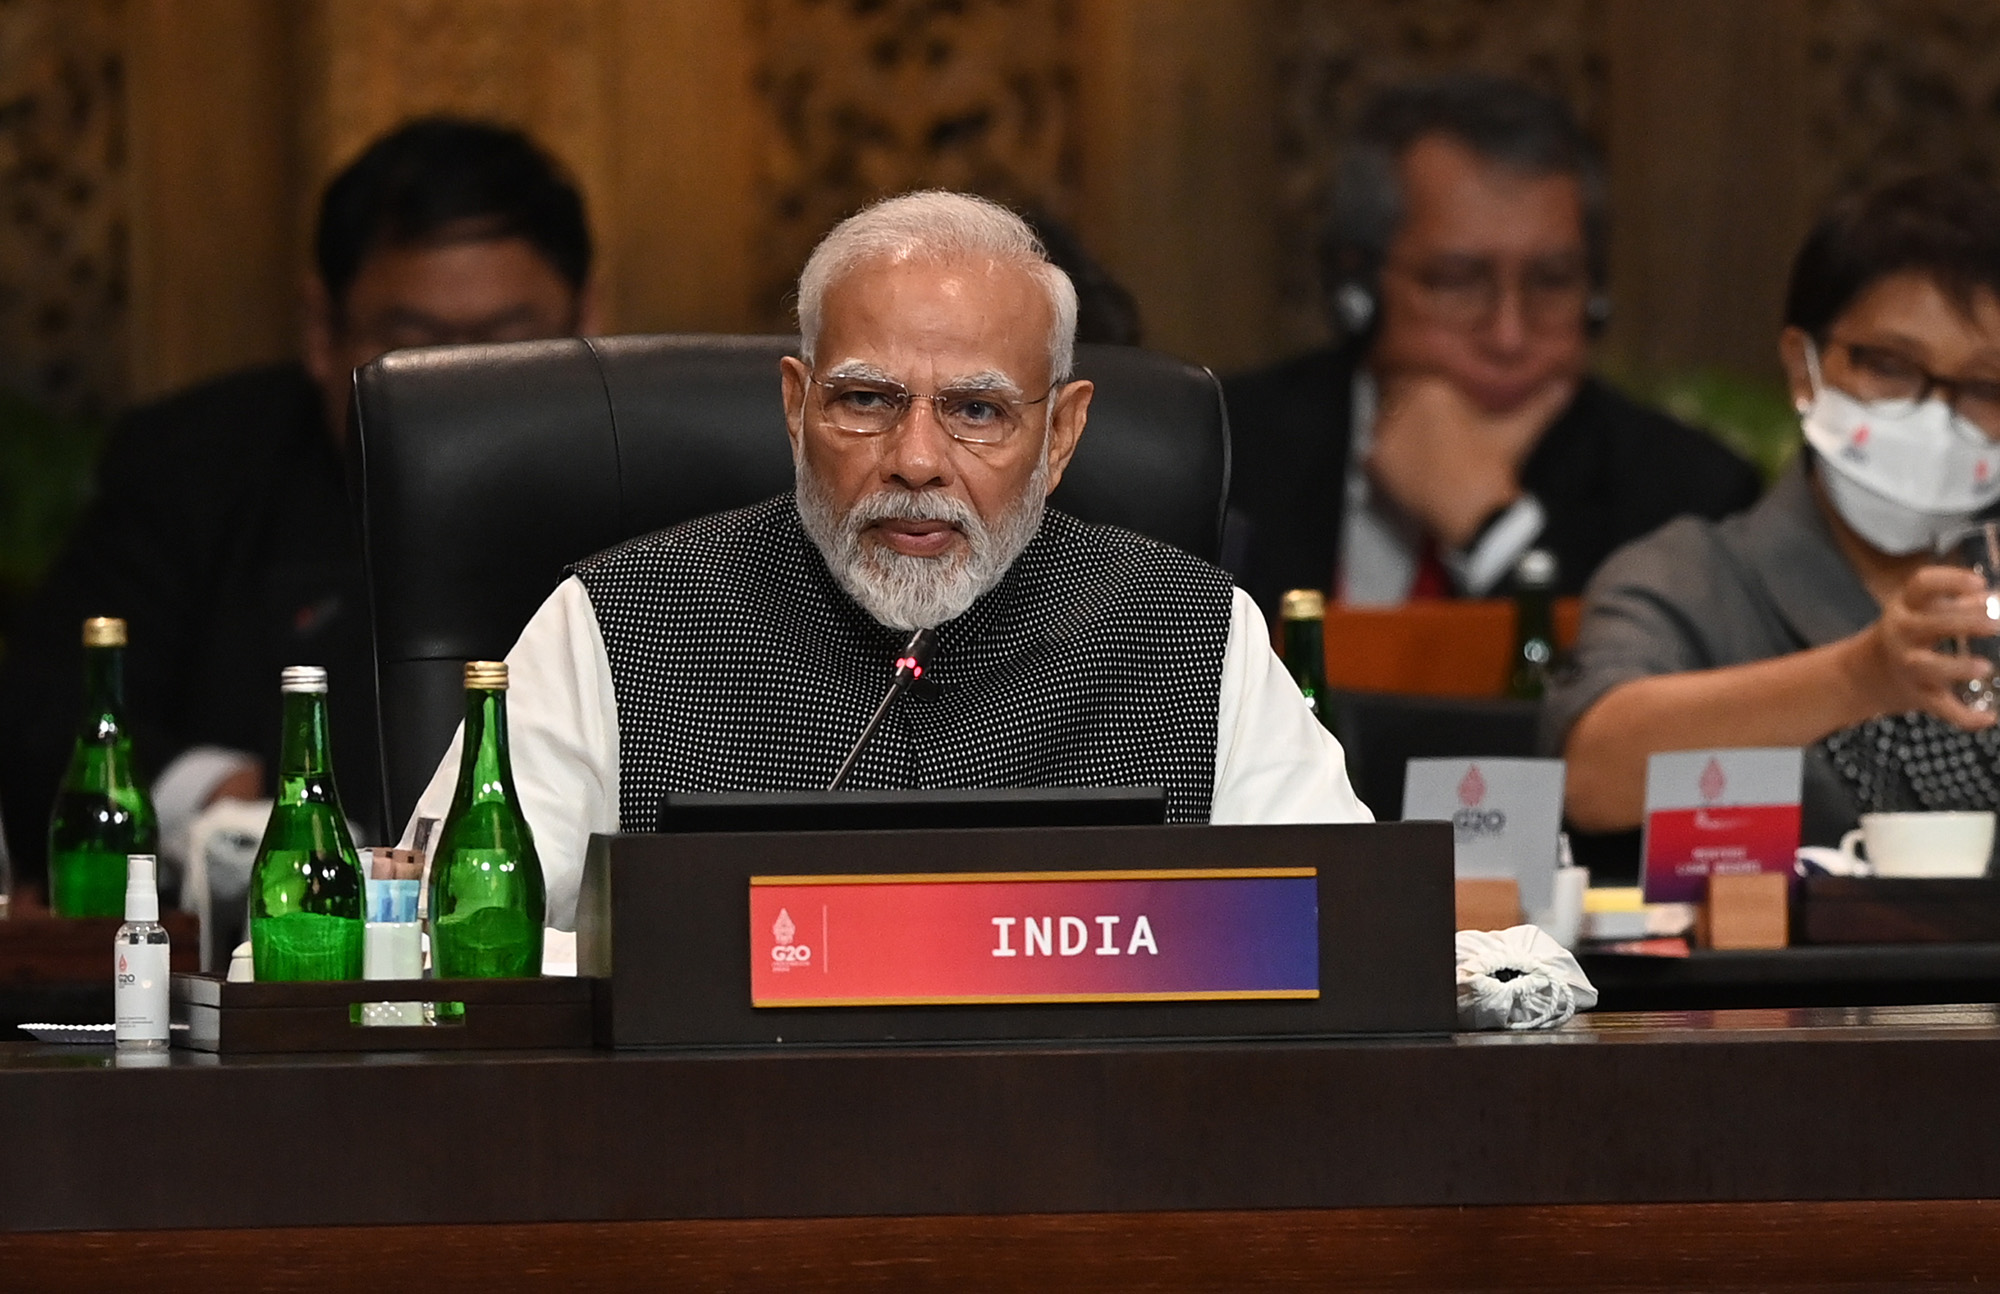 Indian Prime Minister Narendra Modi delivers his outlook on the opening ceremony of the G20 Leaders' Summit in Bali, Indonesia, on November 15.